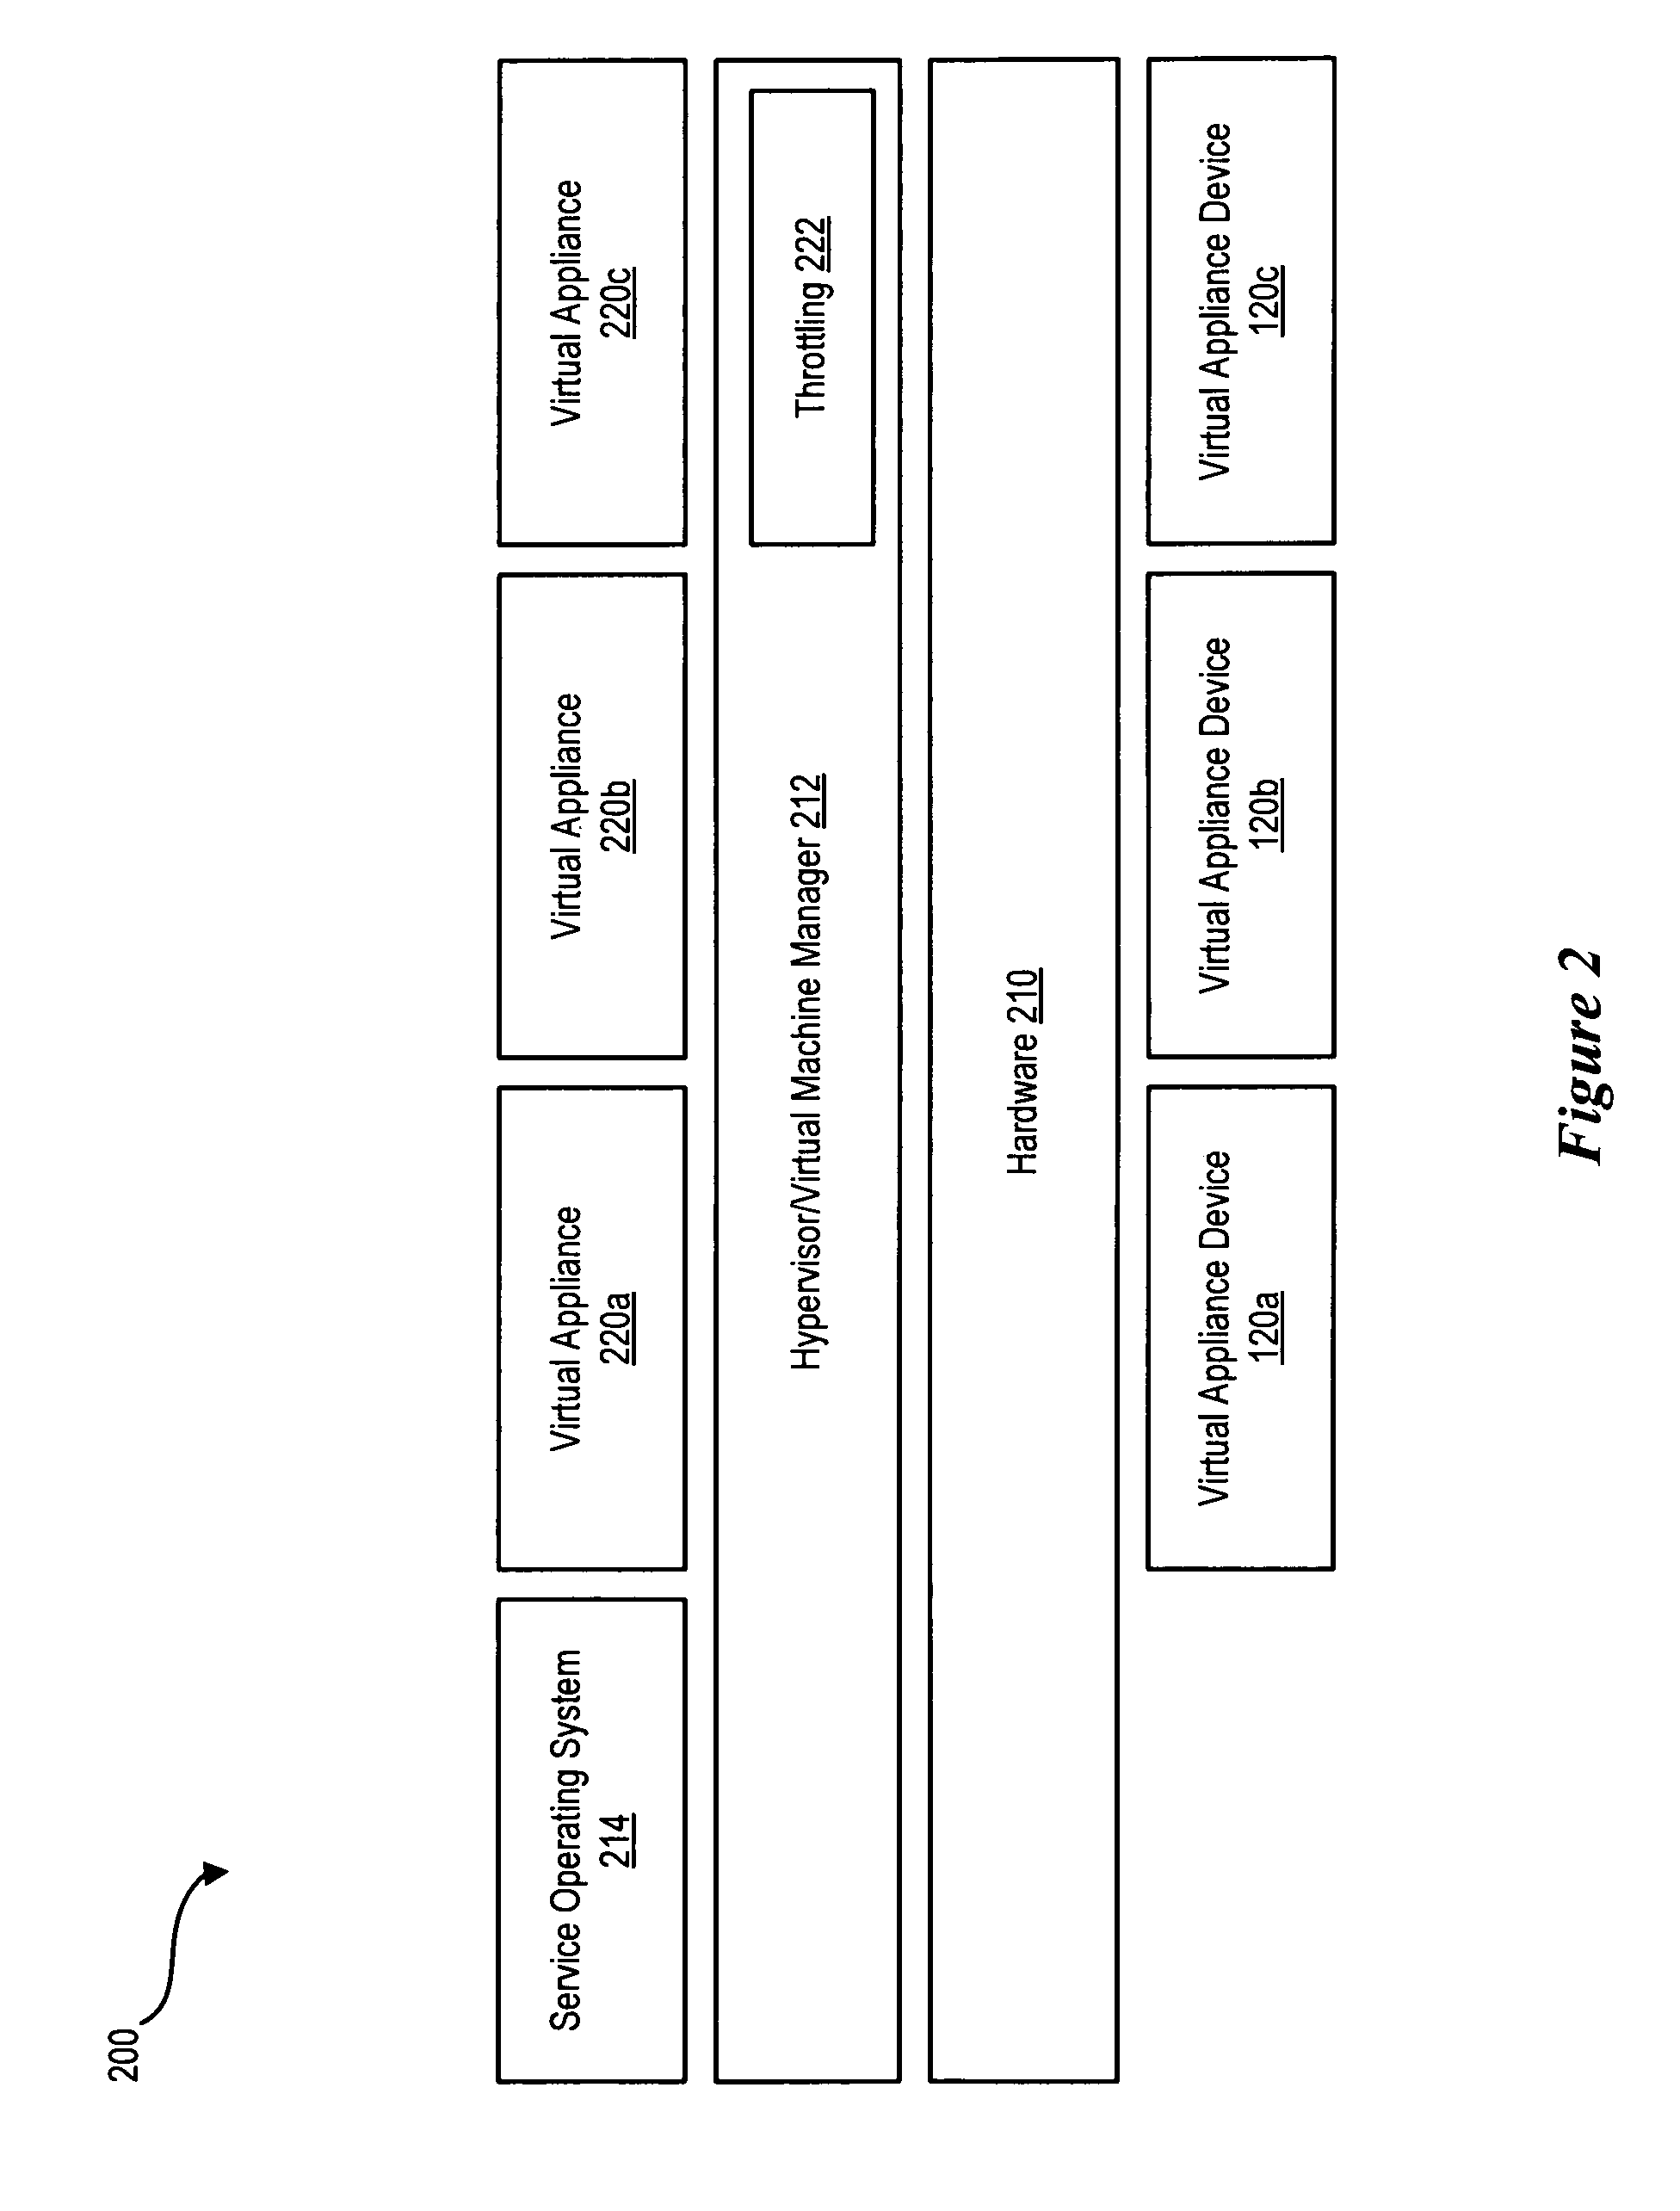 Enabling throttling of resources on a virtualization enabled information handling system